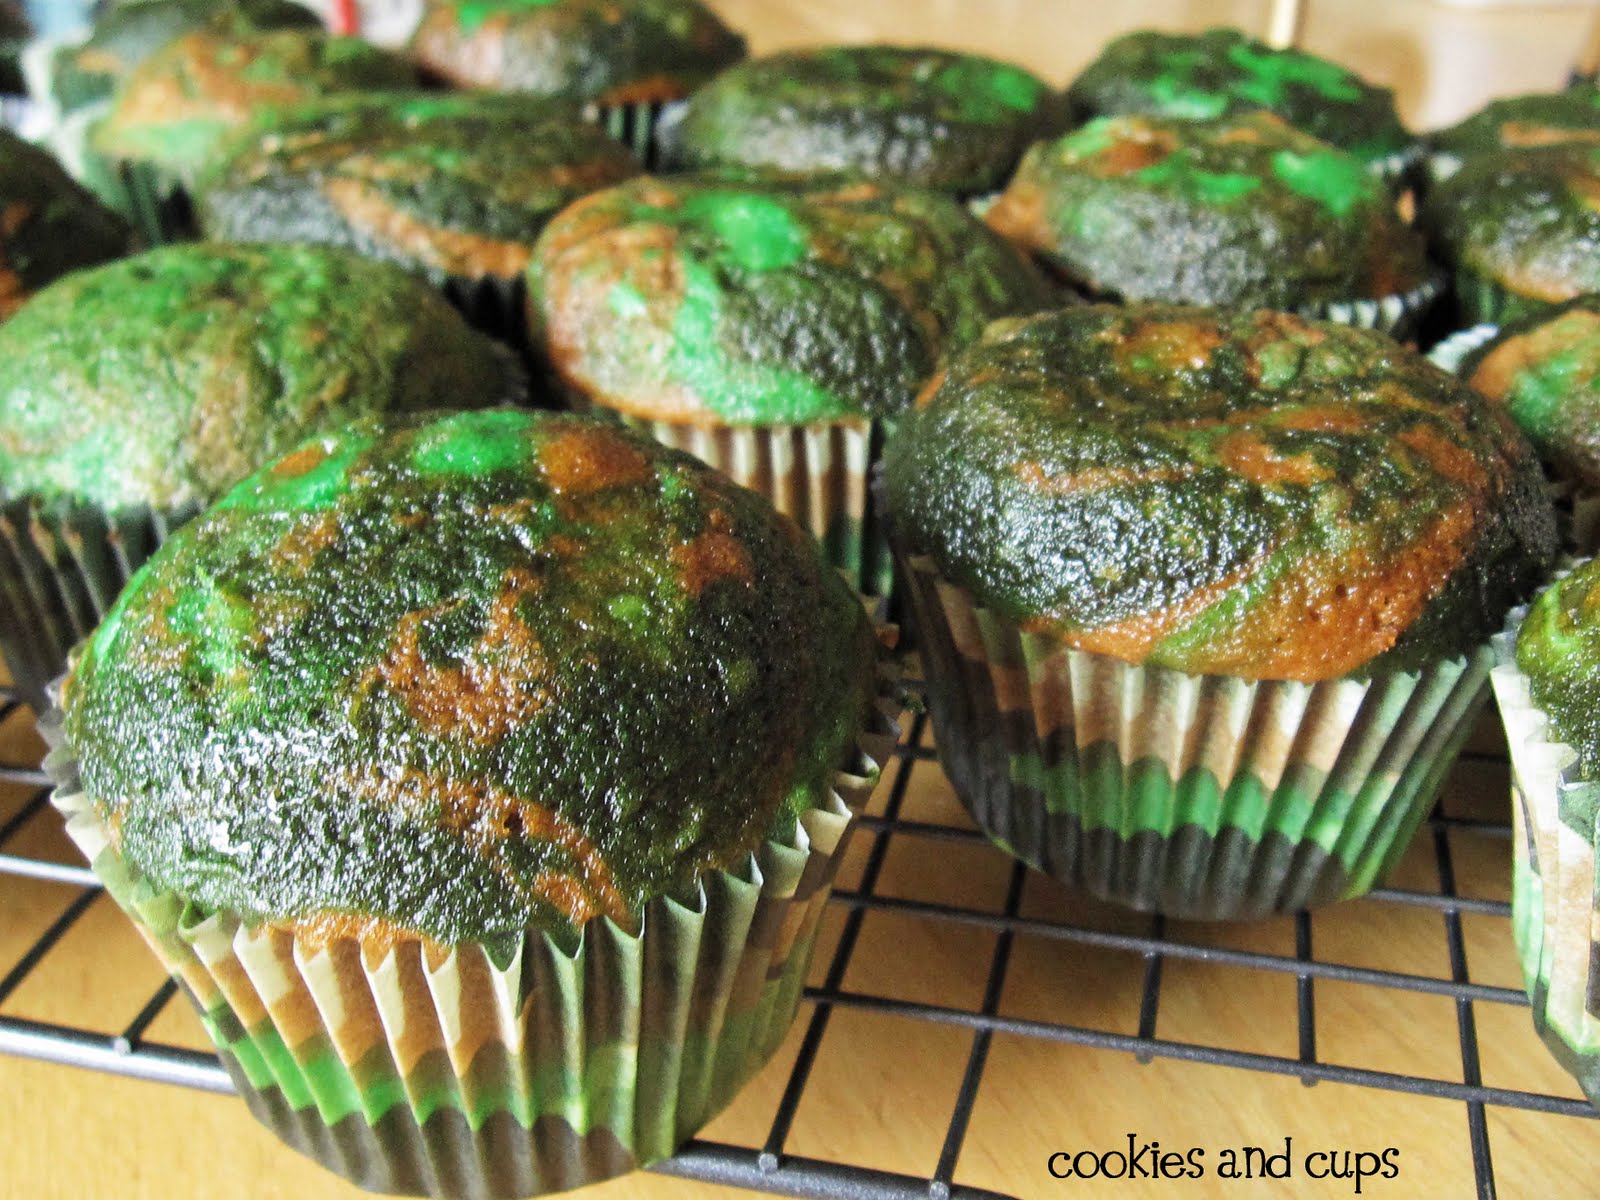 The Cupcake Table: Camouflage Cupcakes